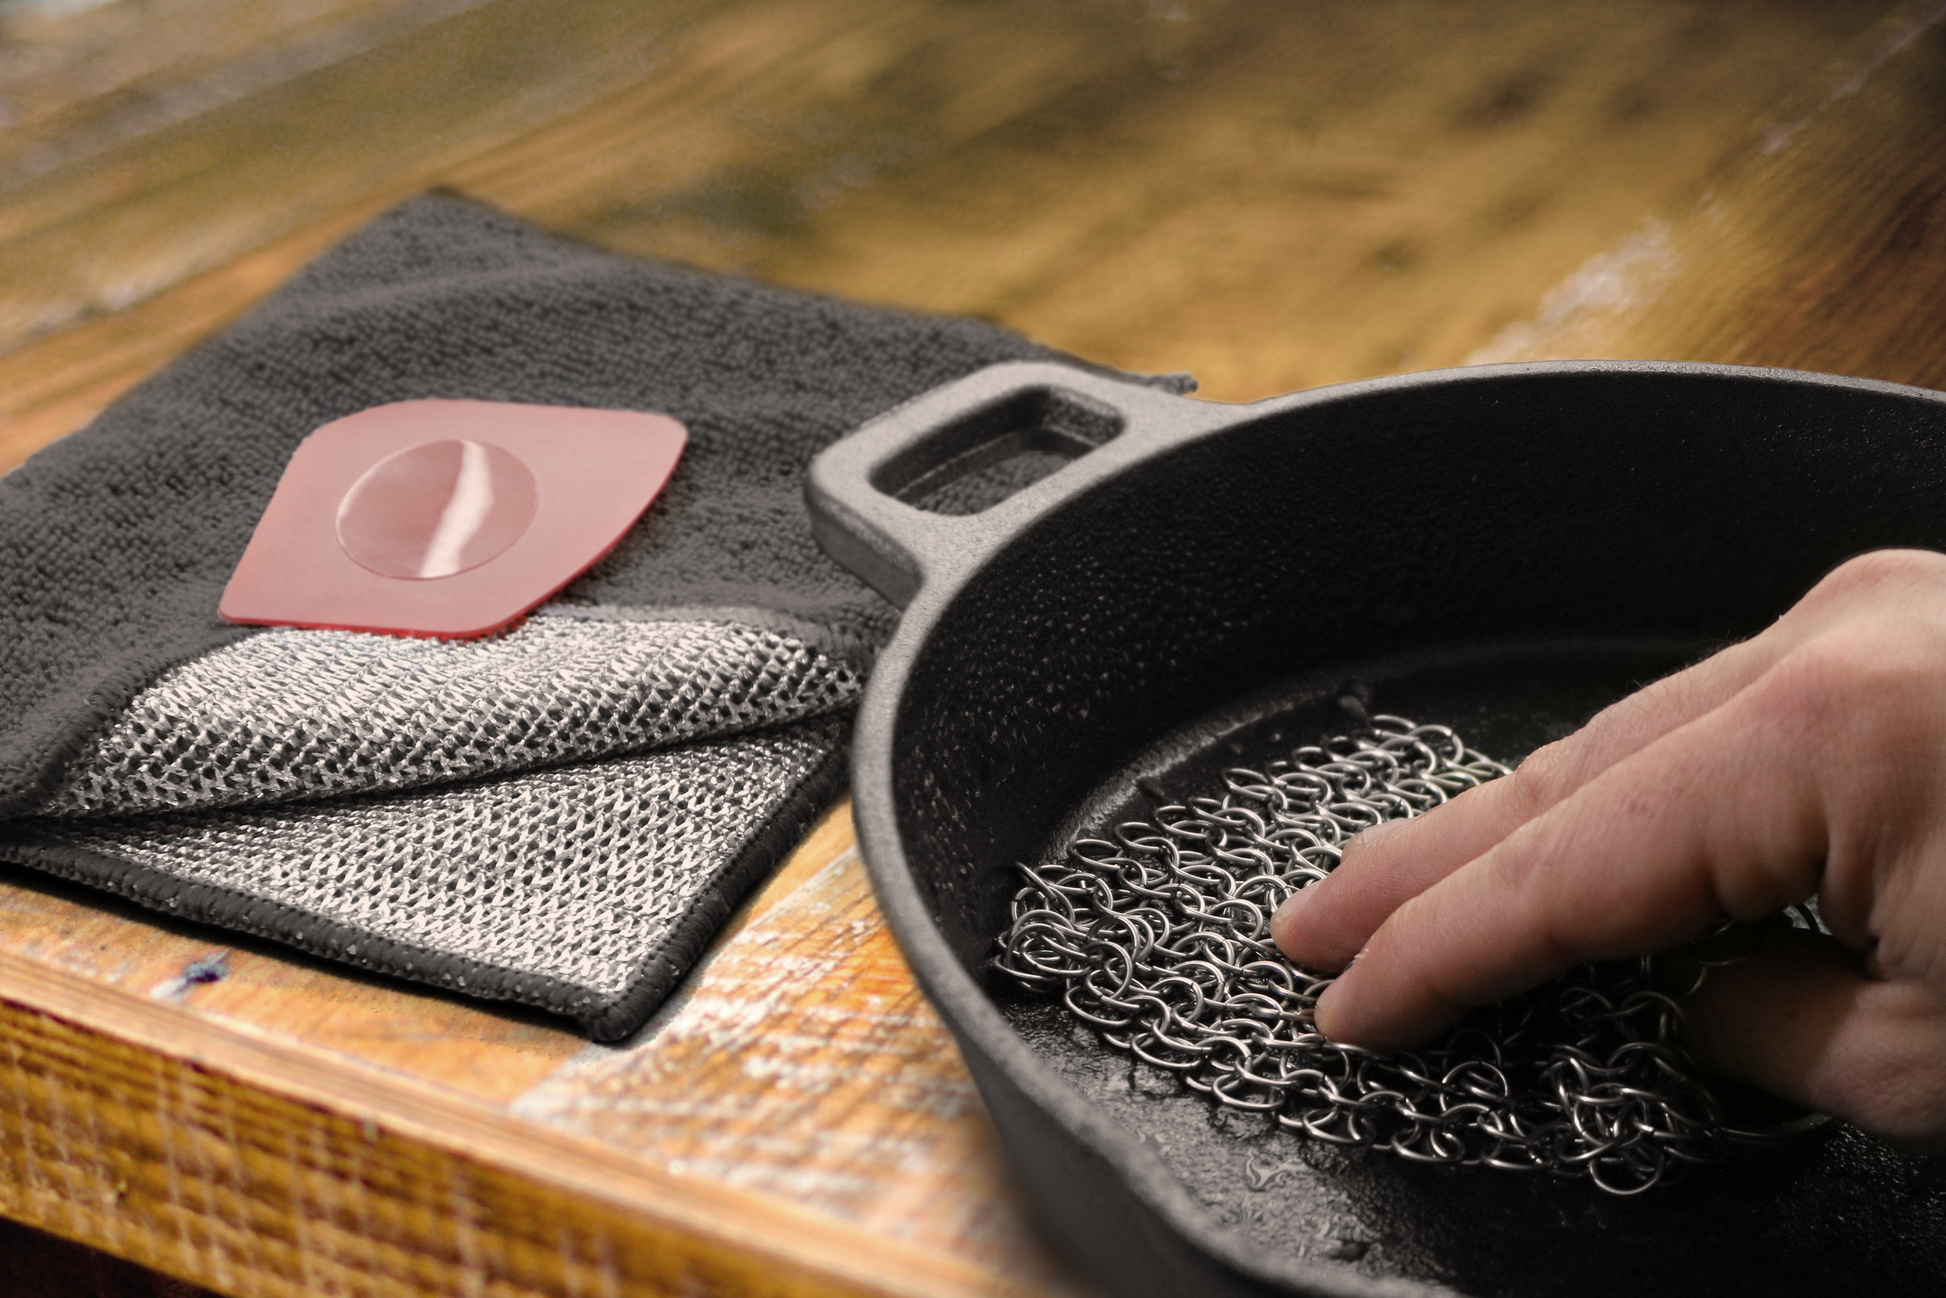 Coghlan's Cast Iron Cleaning Kit : Target